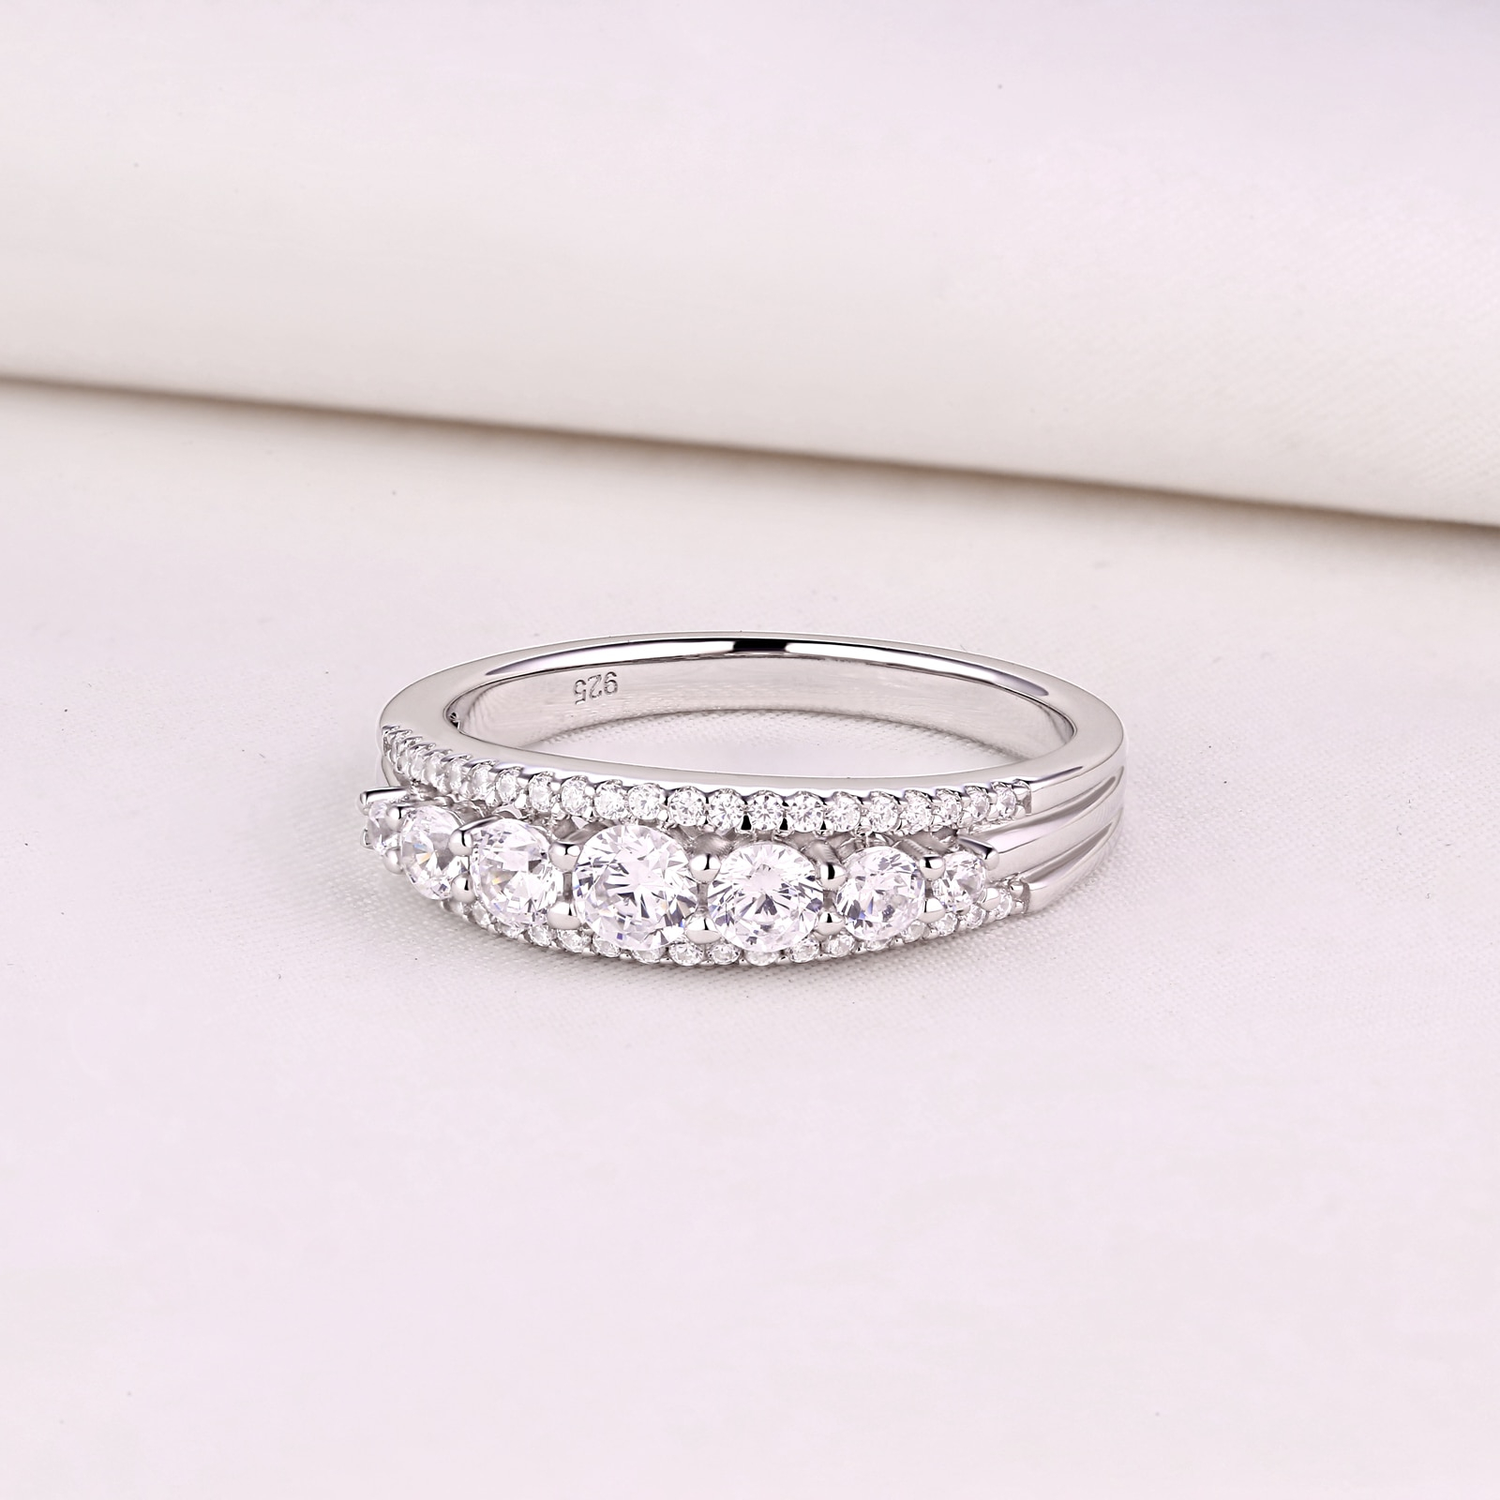 Wedding ring with crystals